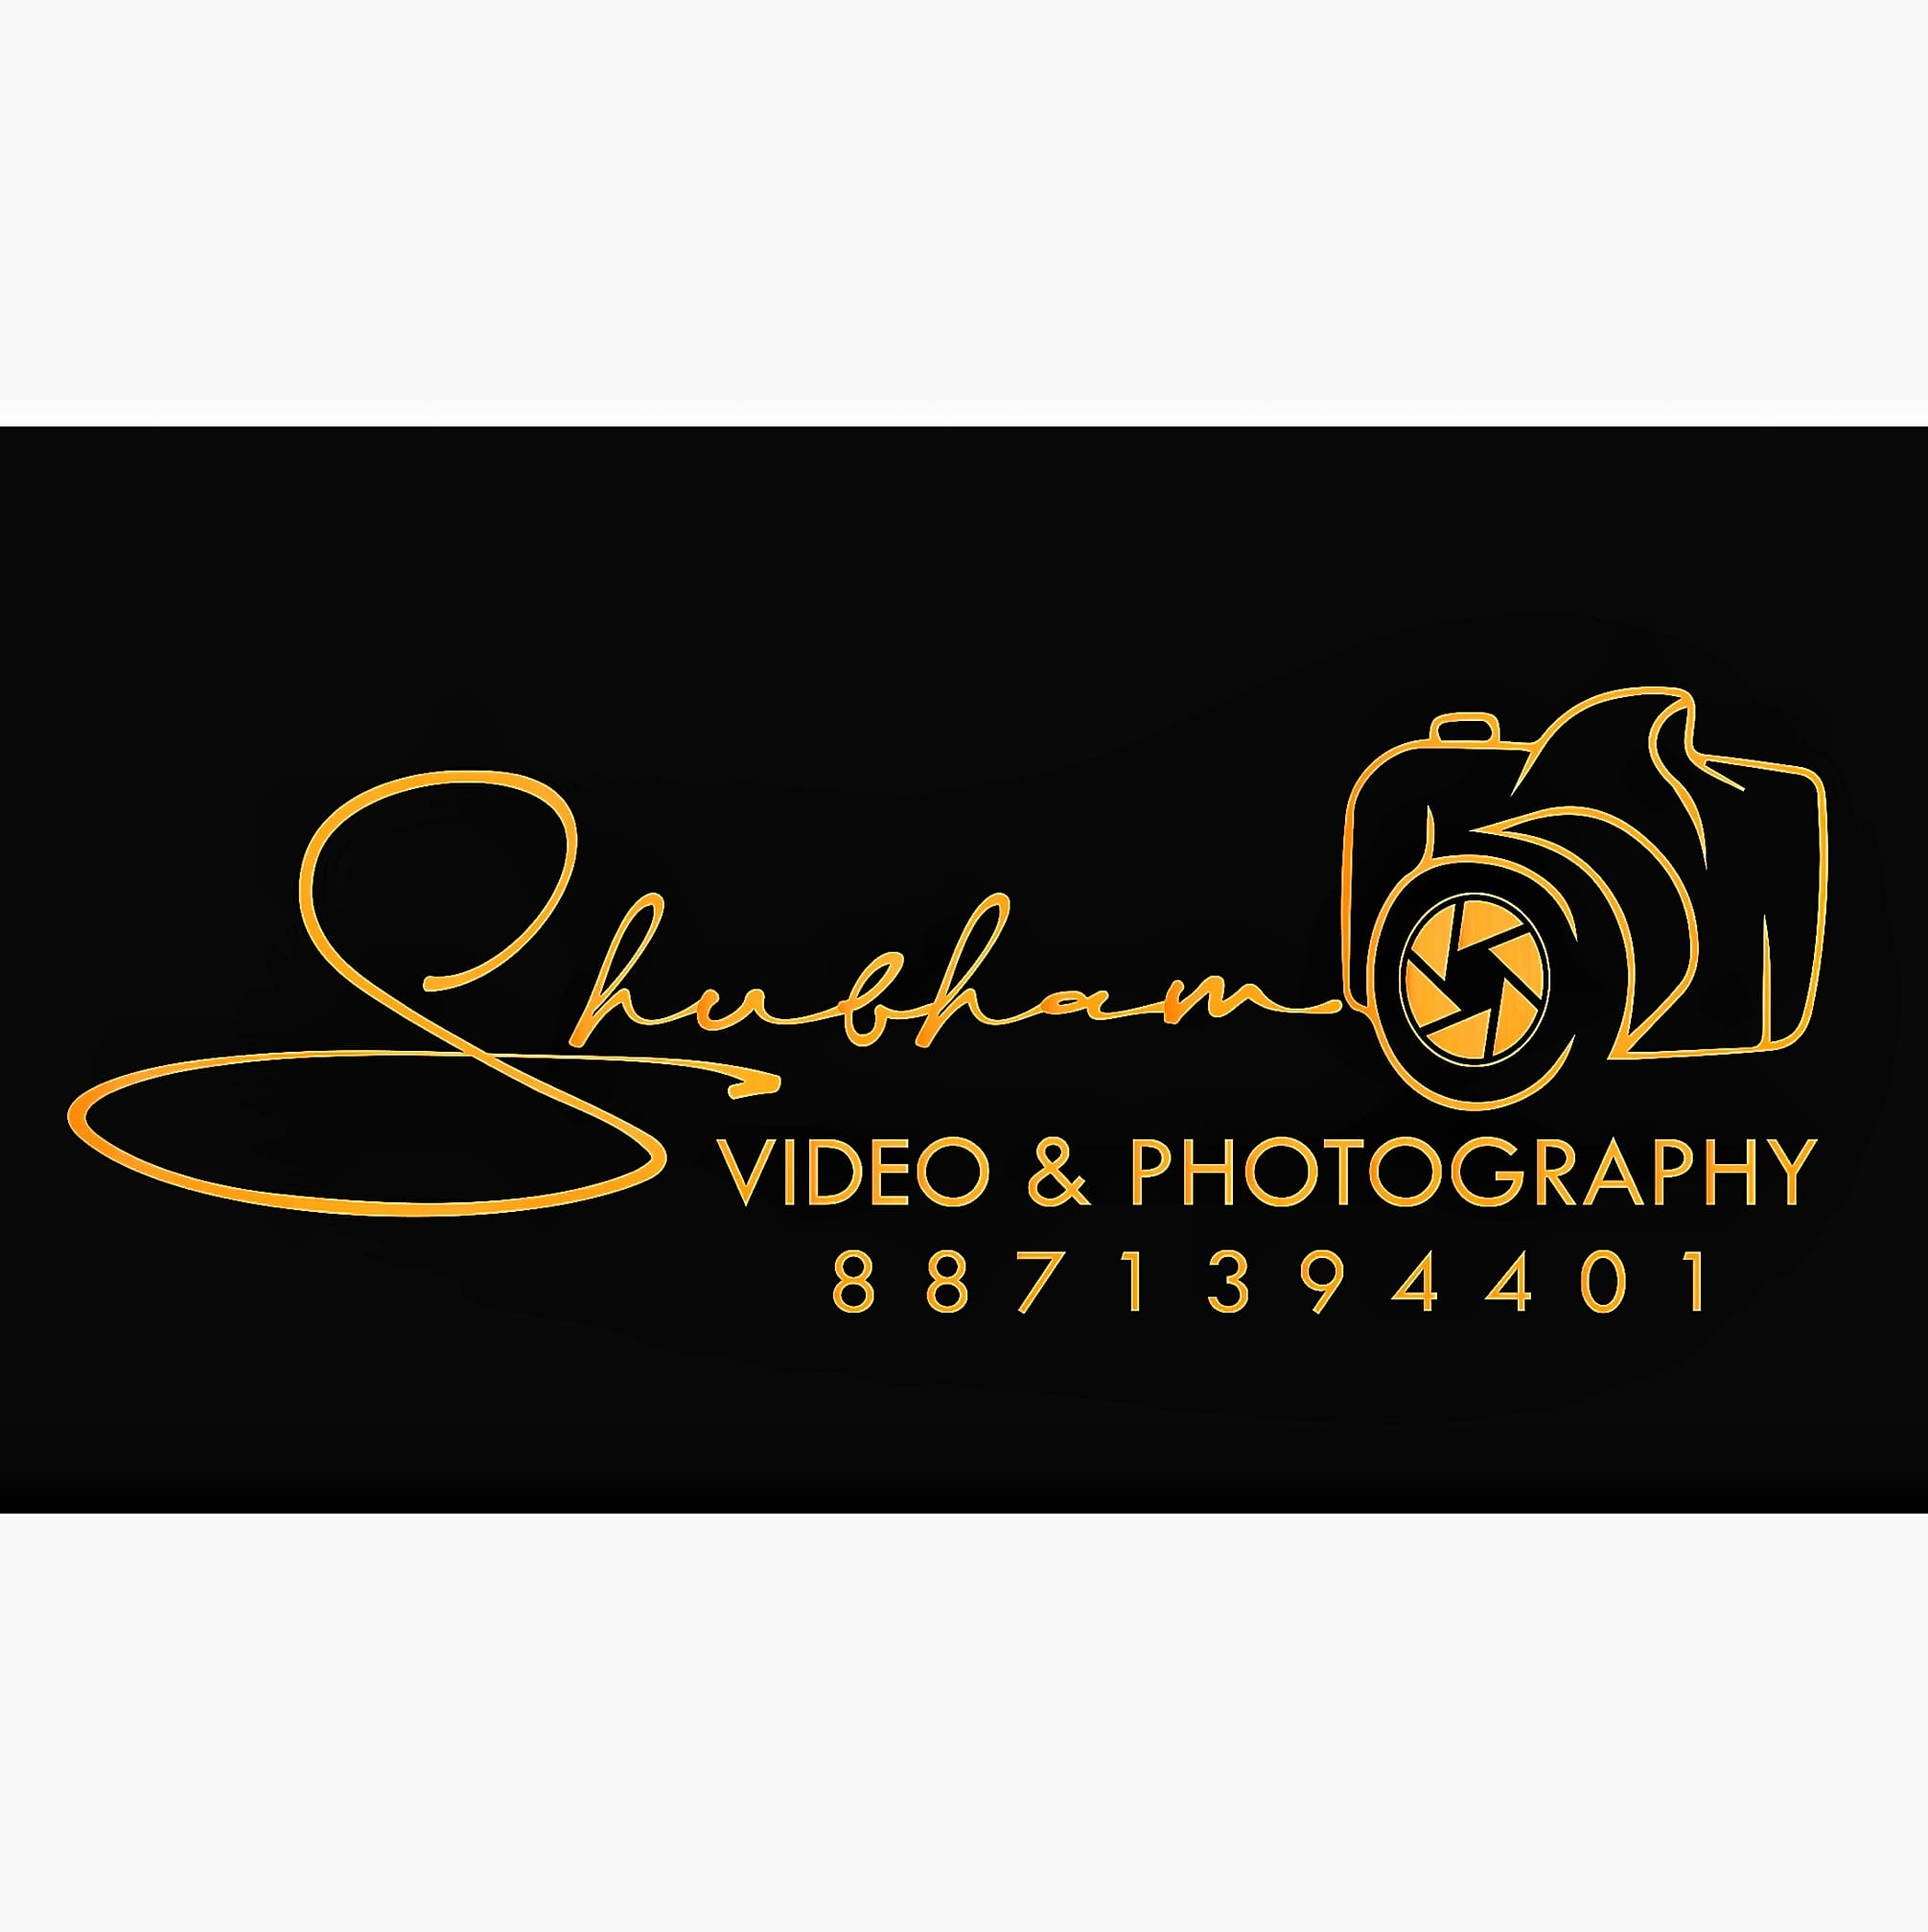 shubham video and photography|Catering Services|Event Services